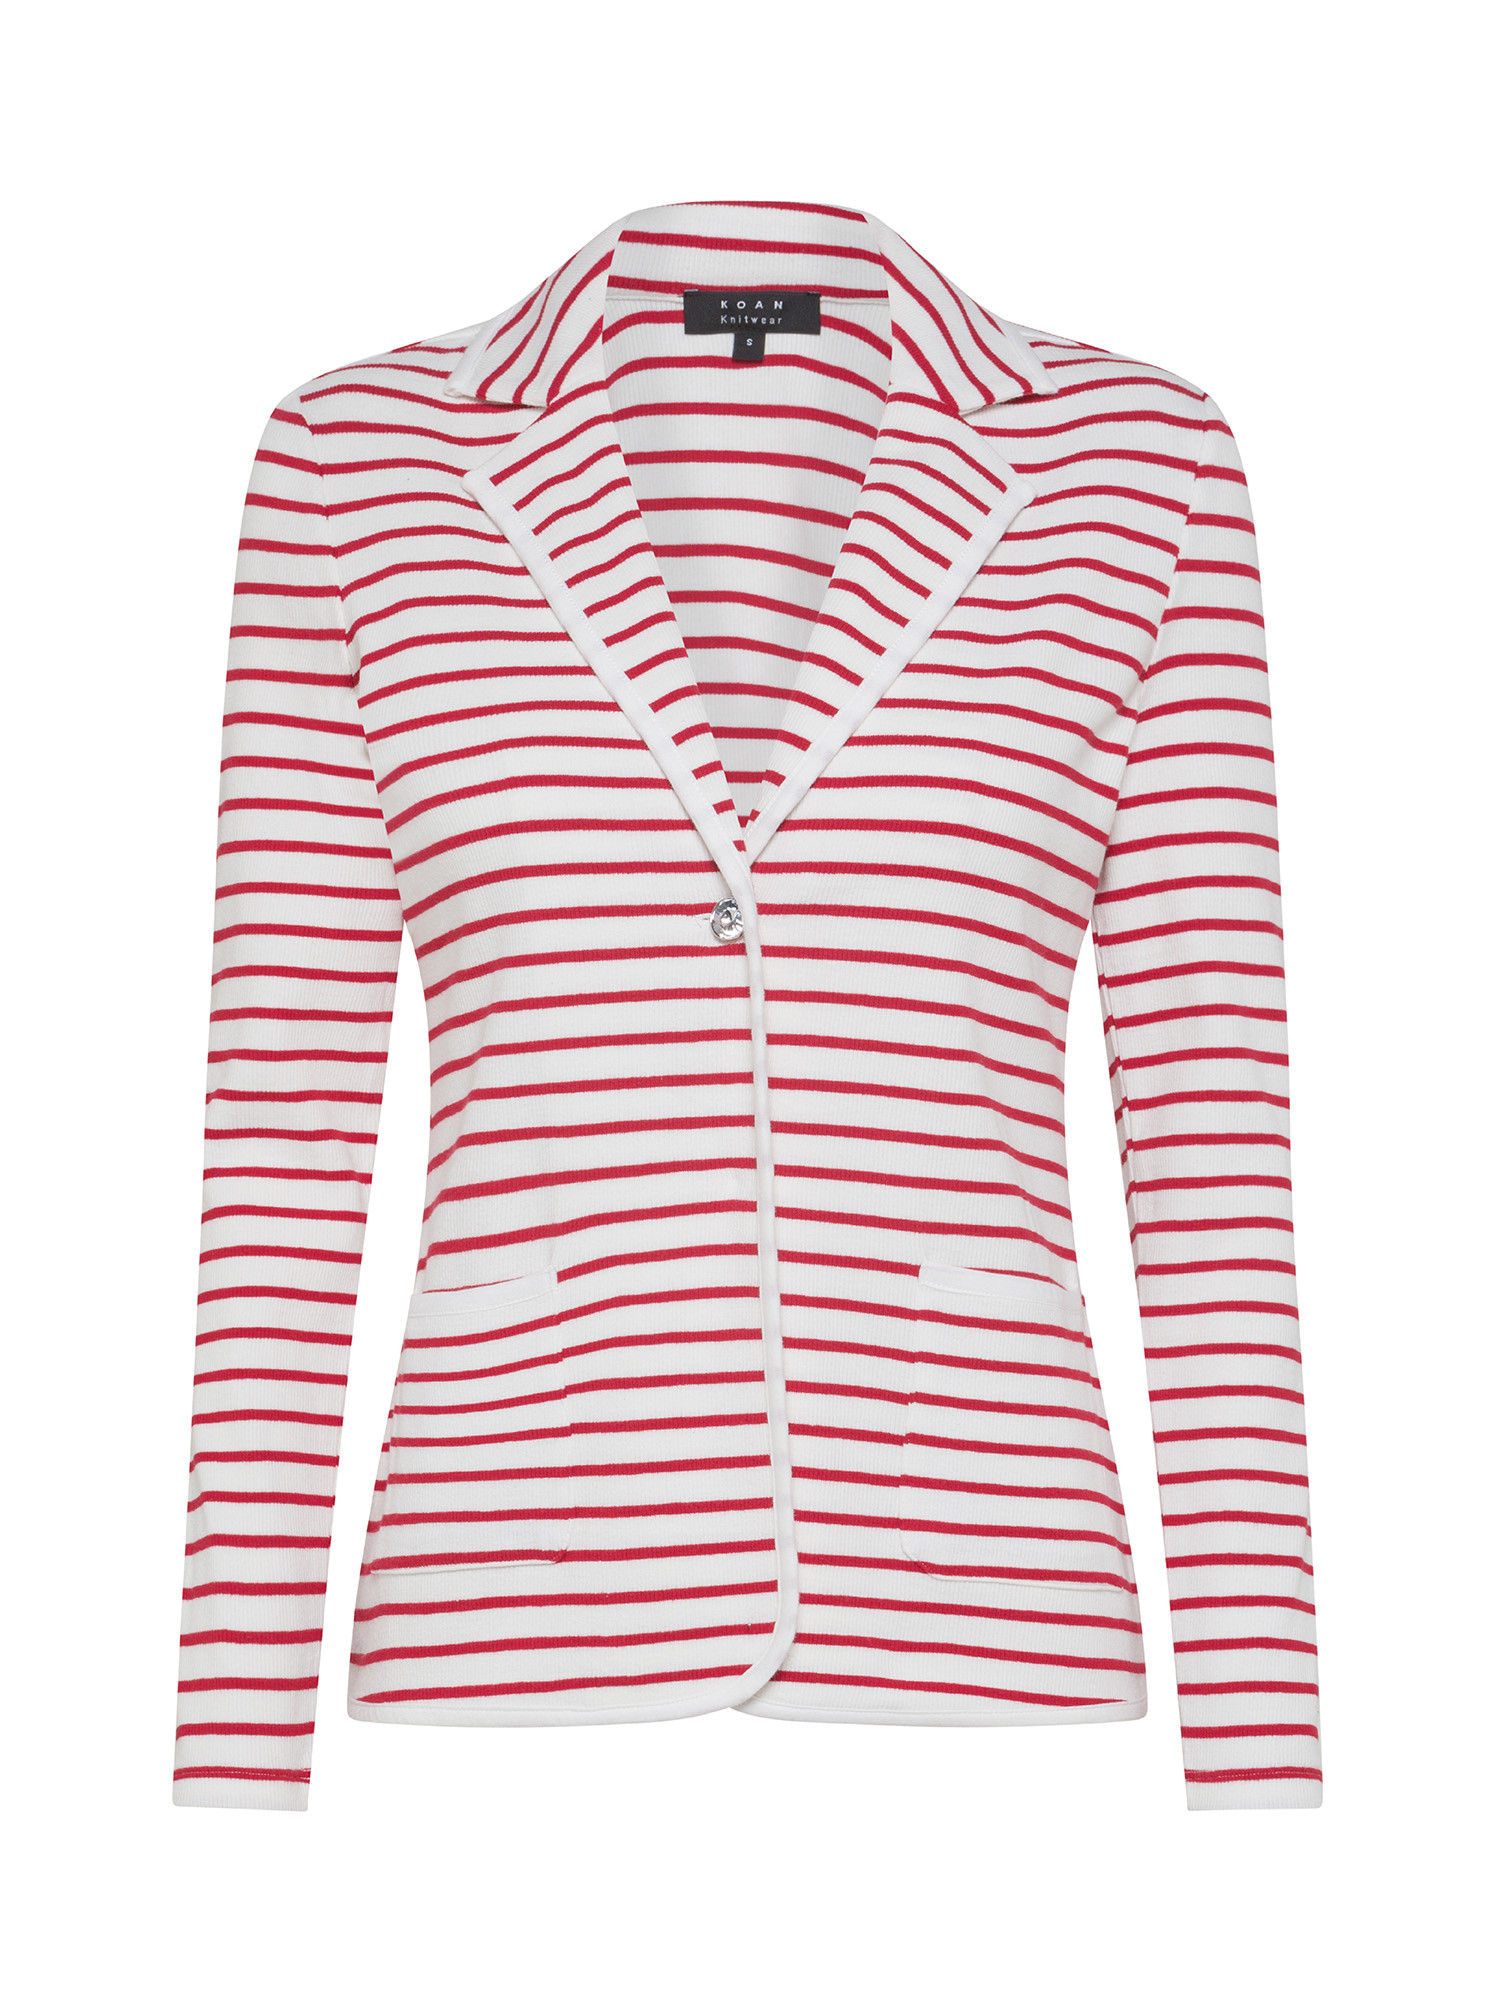 Koan - Ribbed jacket with stripes, Red, large image number 0